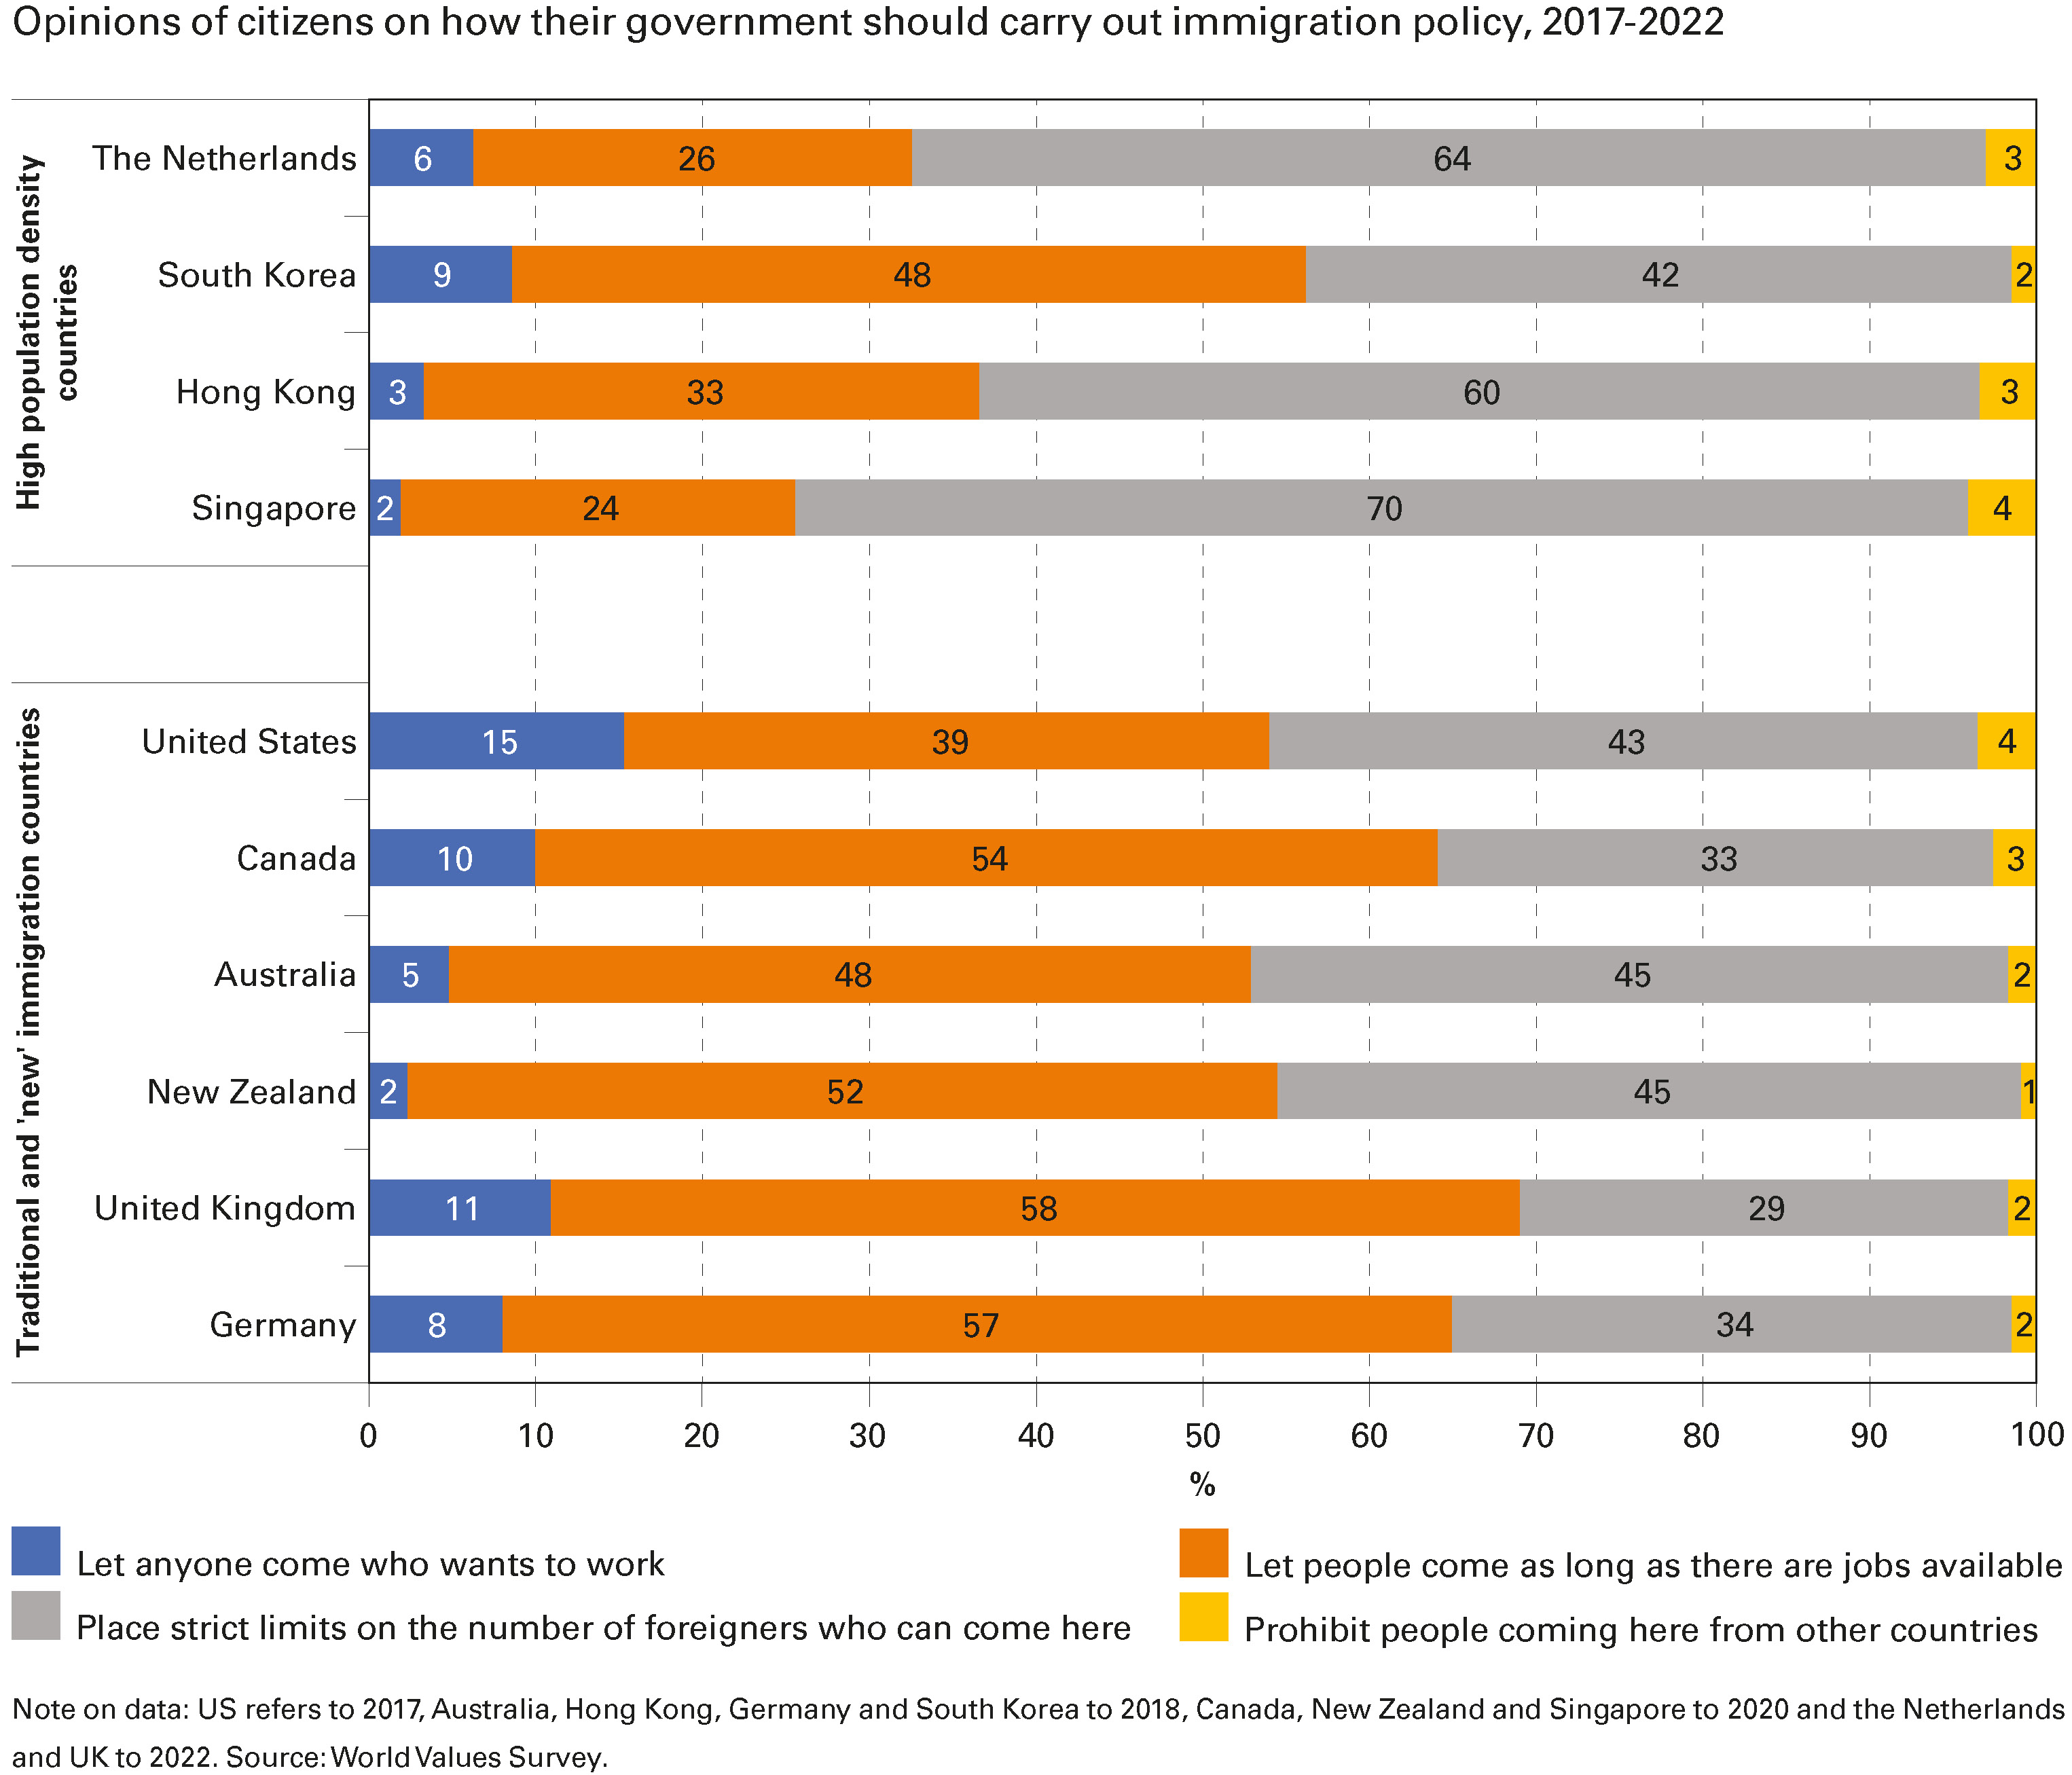 Opinions of citizens on how their government should carry out immigration policy, 2017-2022